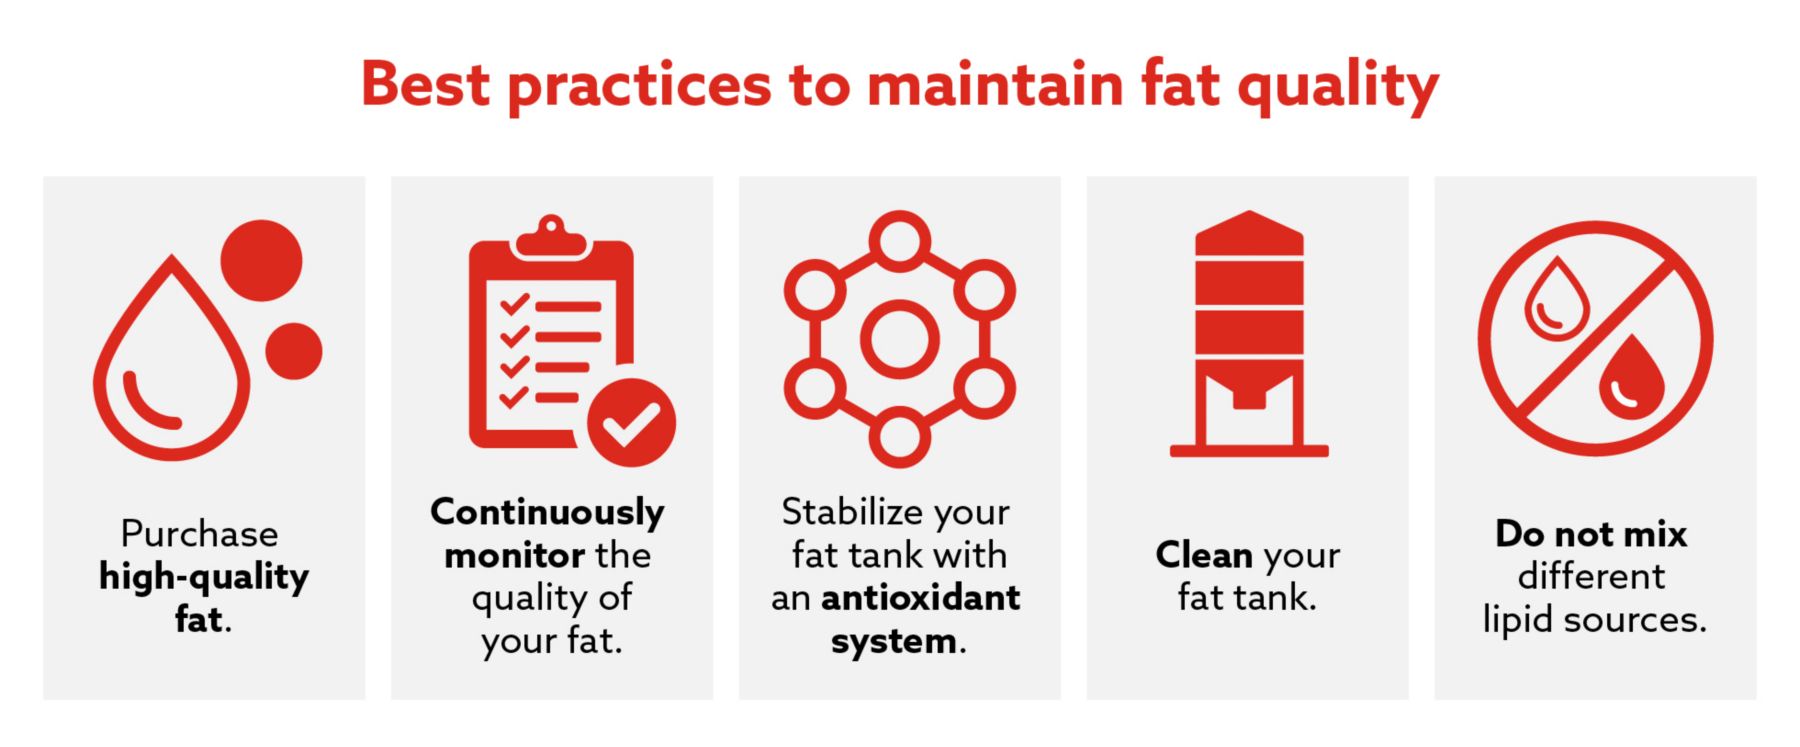 Best practices to maintain fat quality